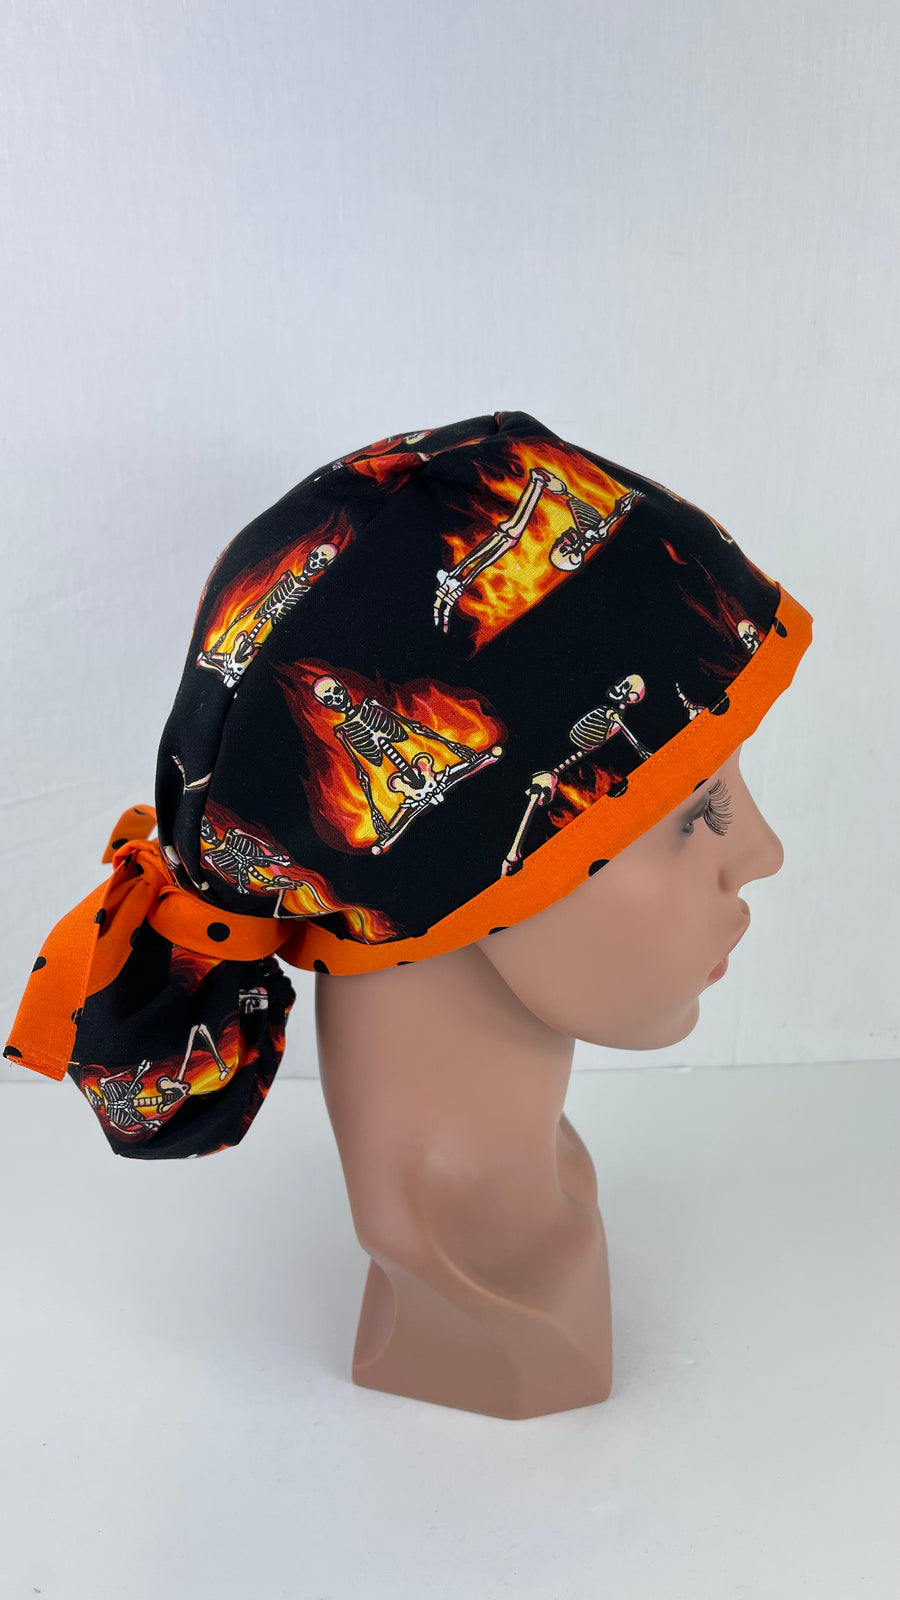 Yoga Skeleton in the Flames Ponytail Hat